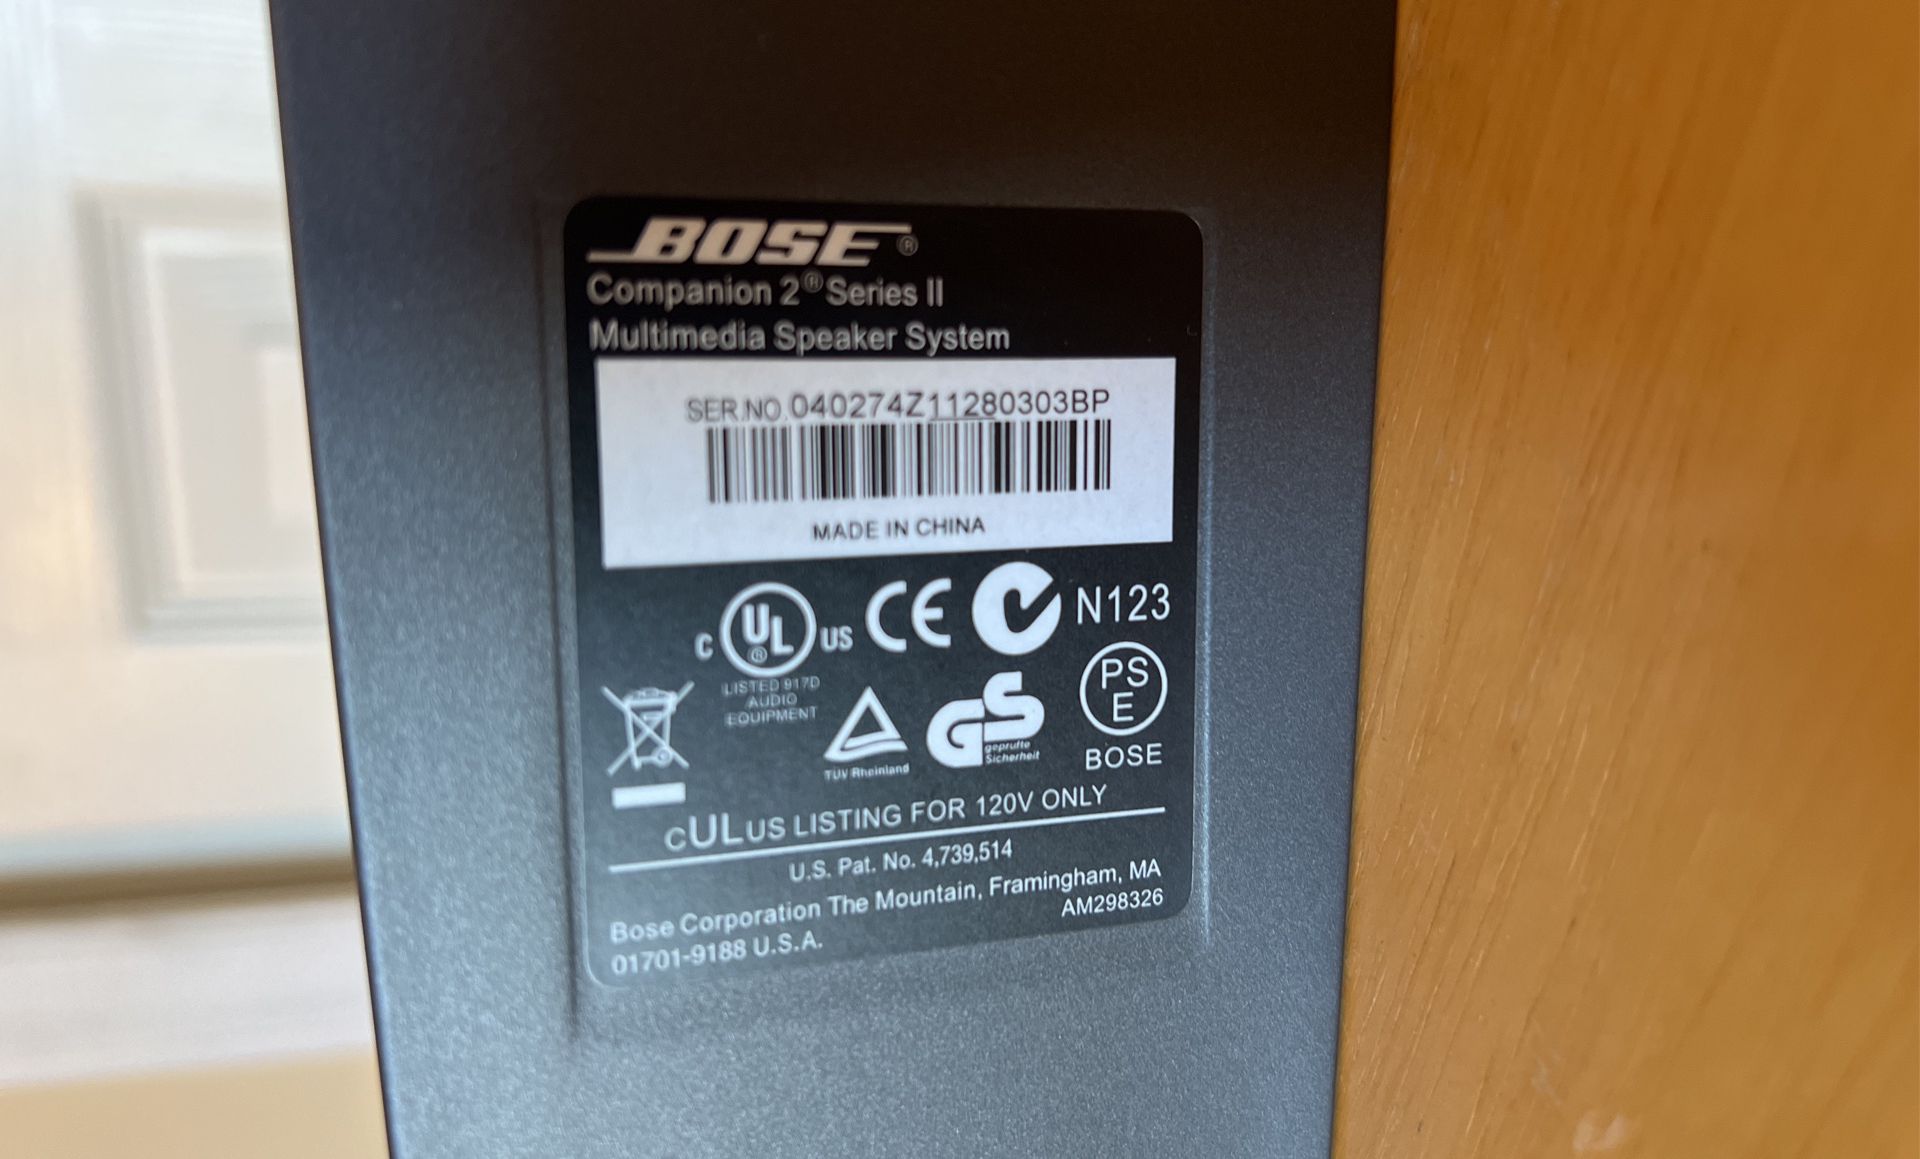  Bose Companion, Two Series ll Speakers